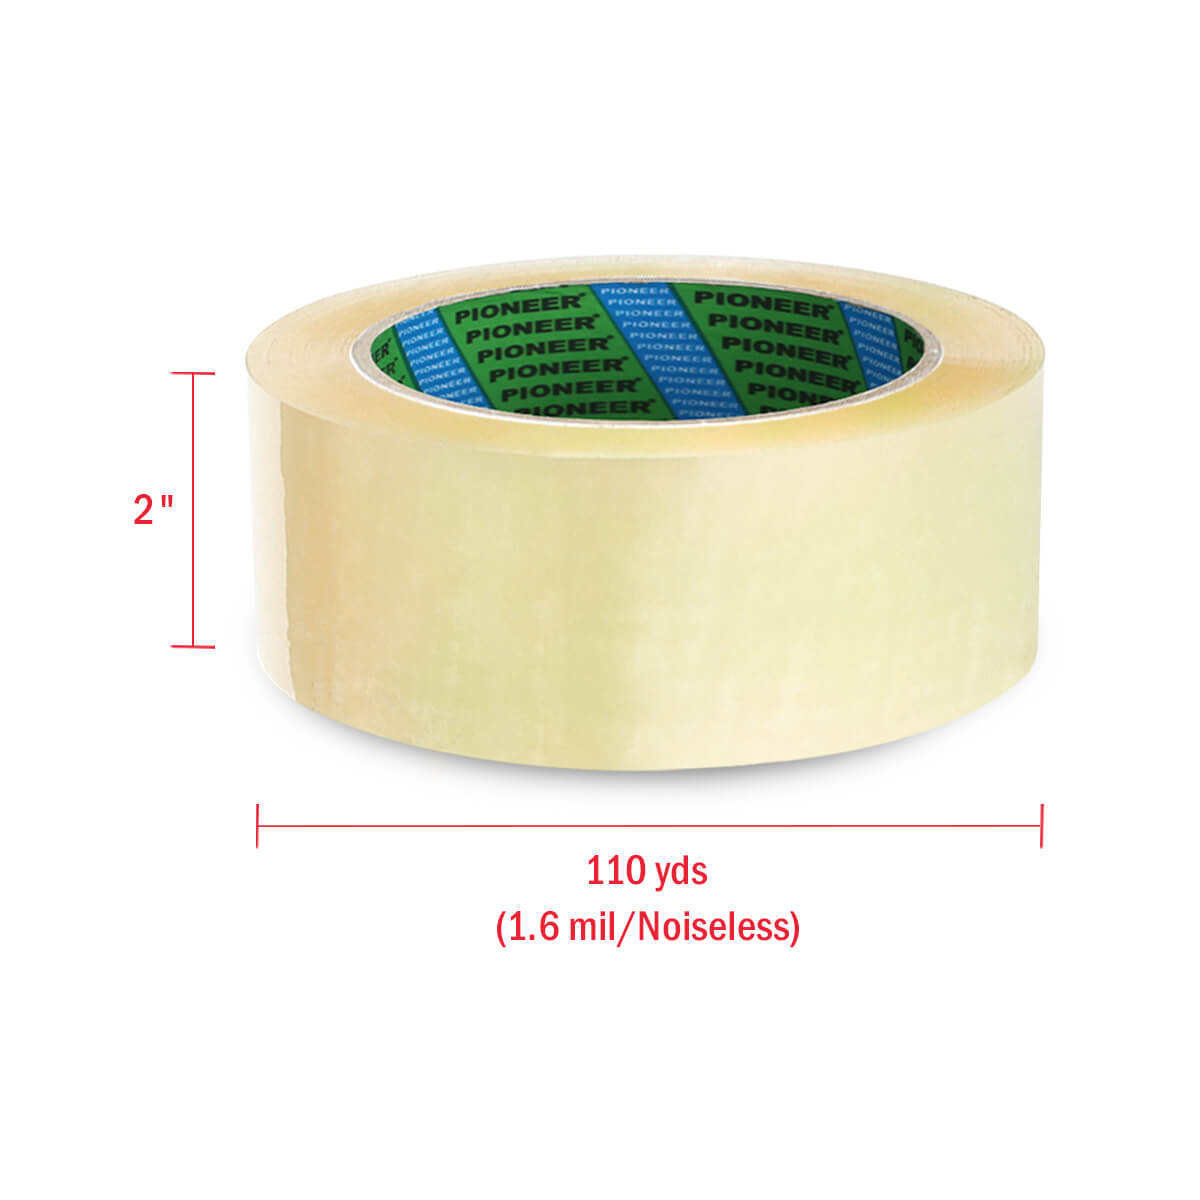 Clear Silent Packing Tape 2” x 110 yards (48mm x 100M), 1.6 mil thickness